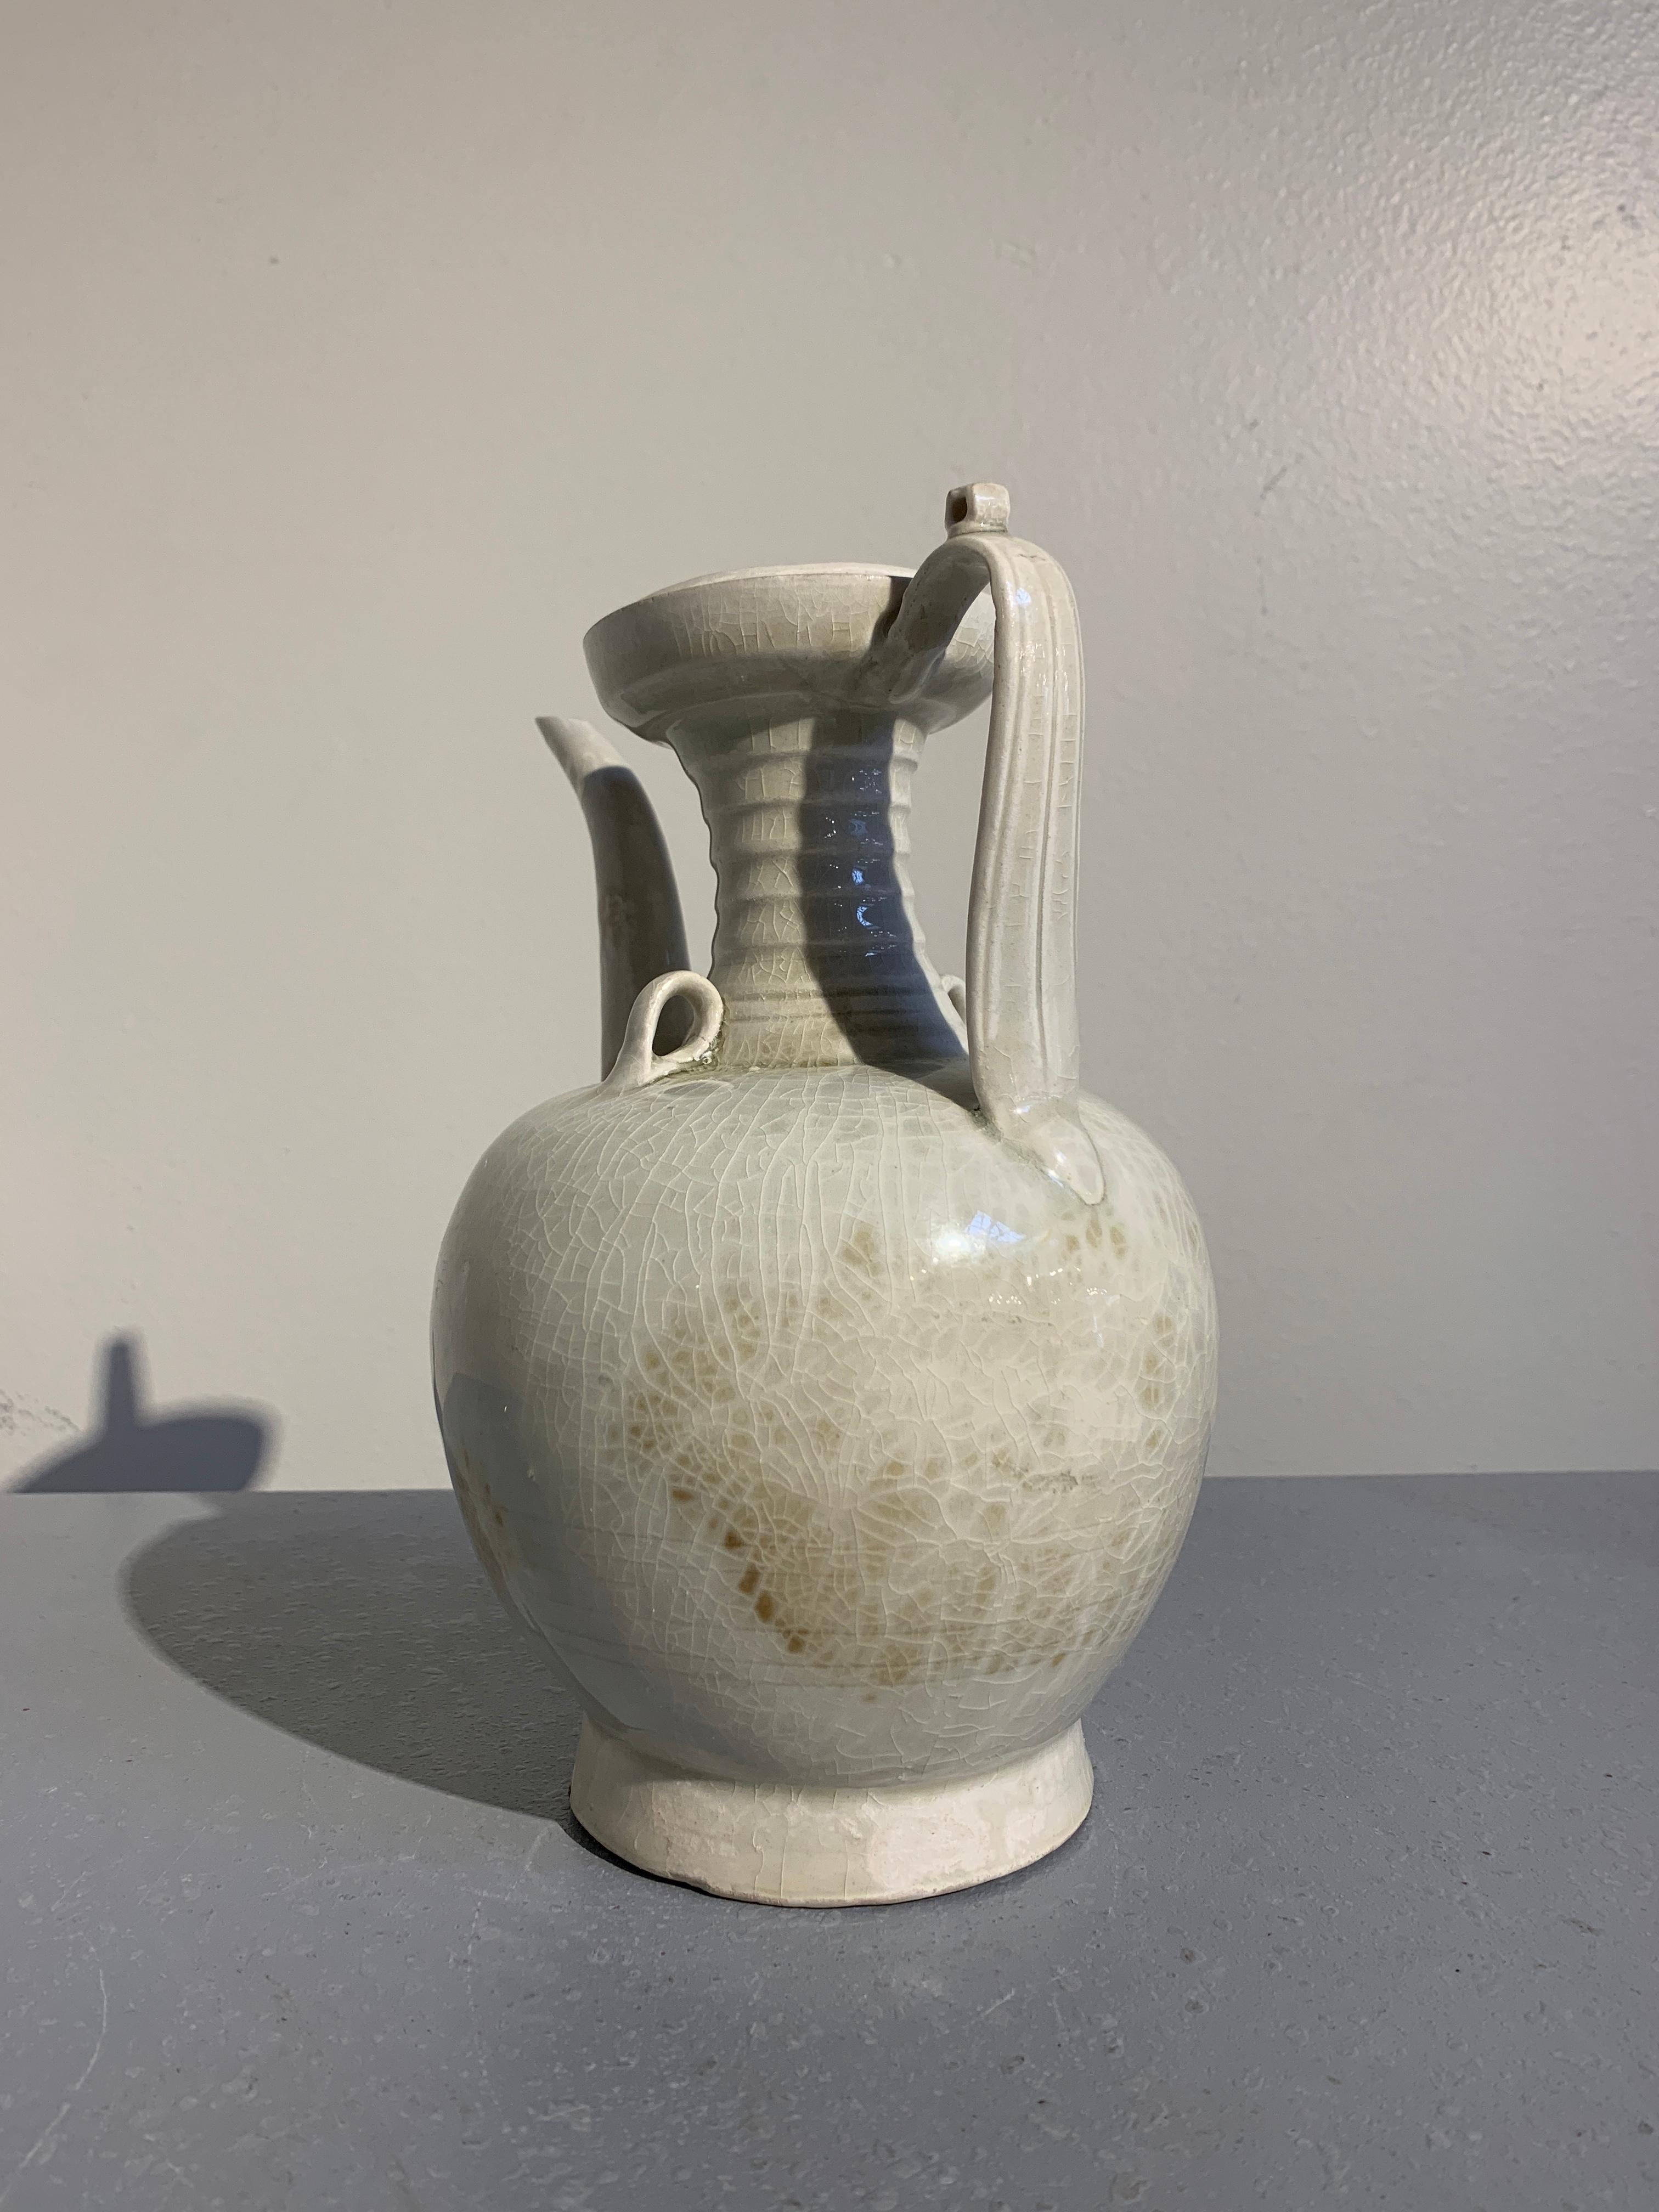 An elegant Chinese ewer with an attractive qingbai (yingqing) glaze, song Dynasty, early 13th century.

The ewer features a bulbous body resting on a tall, slightly splayed foot. The cup mouth supported by a tall, waisted neck with a bowstring